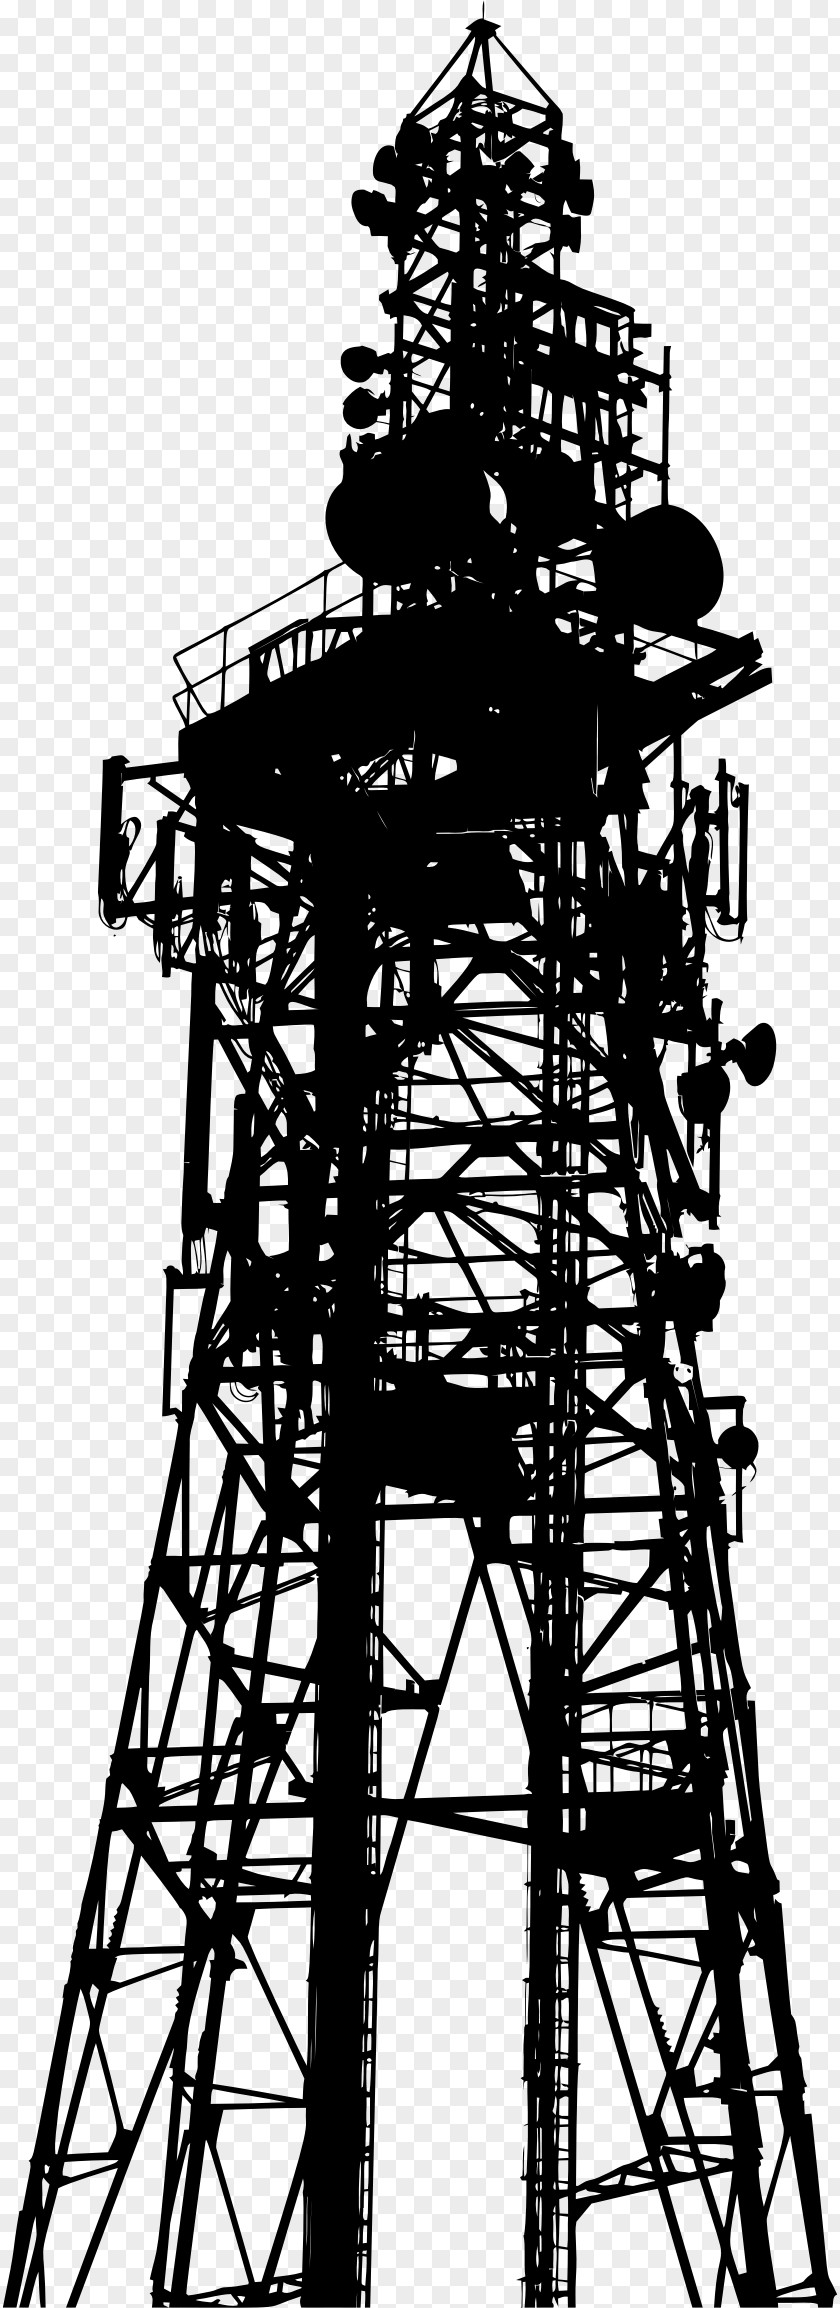 Wireless Telecommunications Tower Silhouette Clip Art PNG